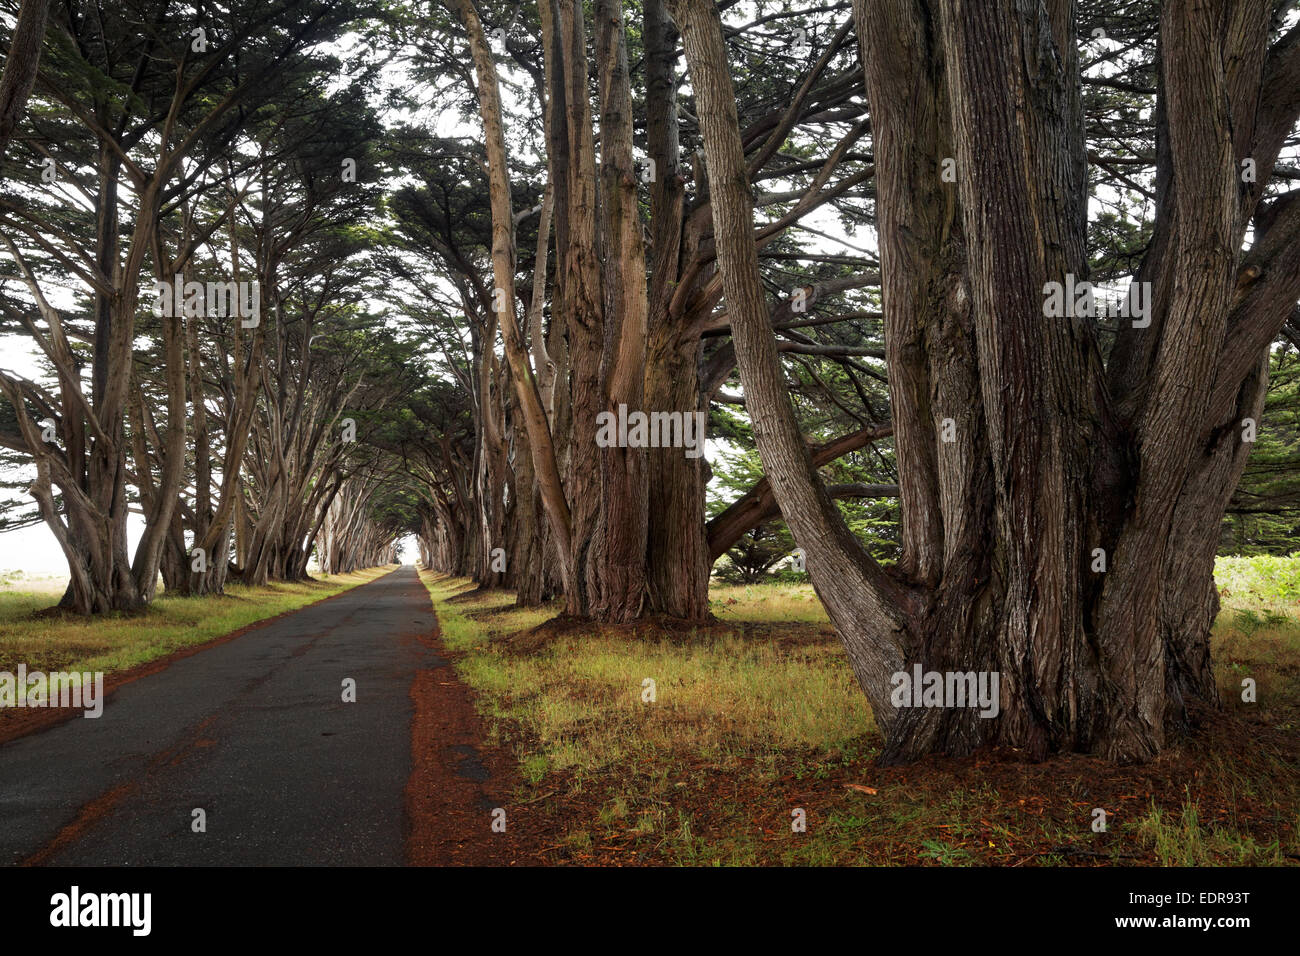 Rows of Monterey cypress trees forming a tree tunnel near historic RCA/Marconi station, Point Reyes National Seashore, Californi Stock Photo